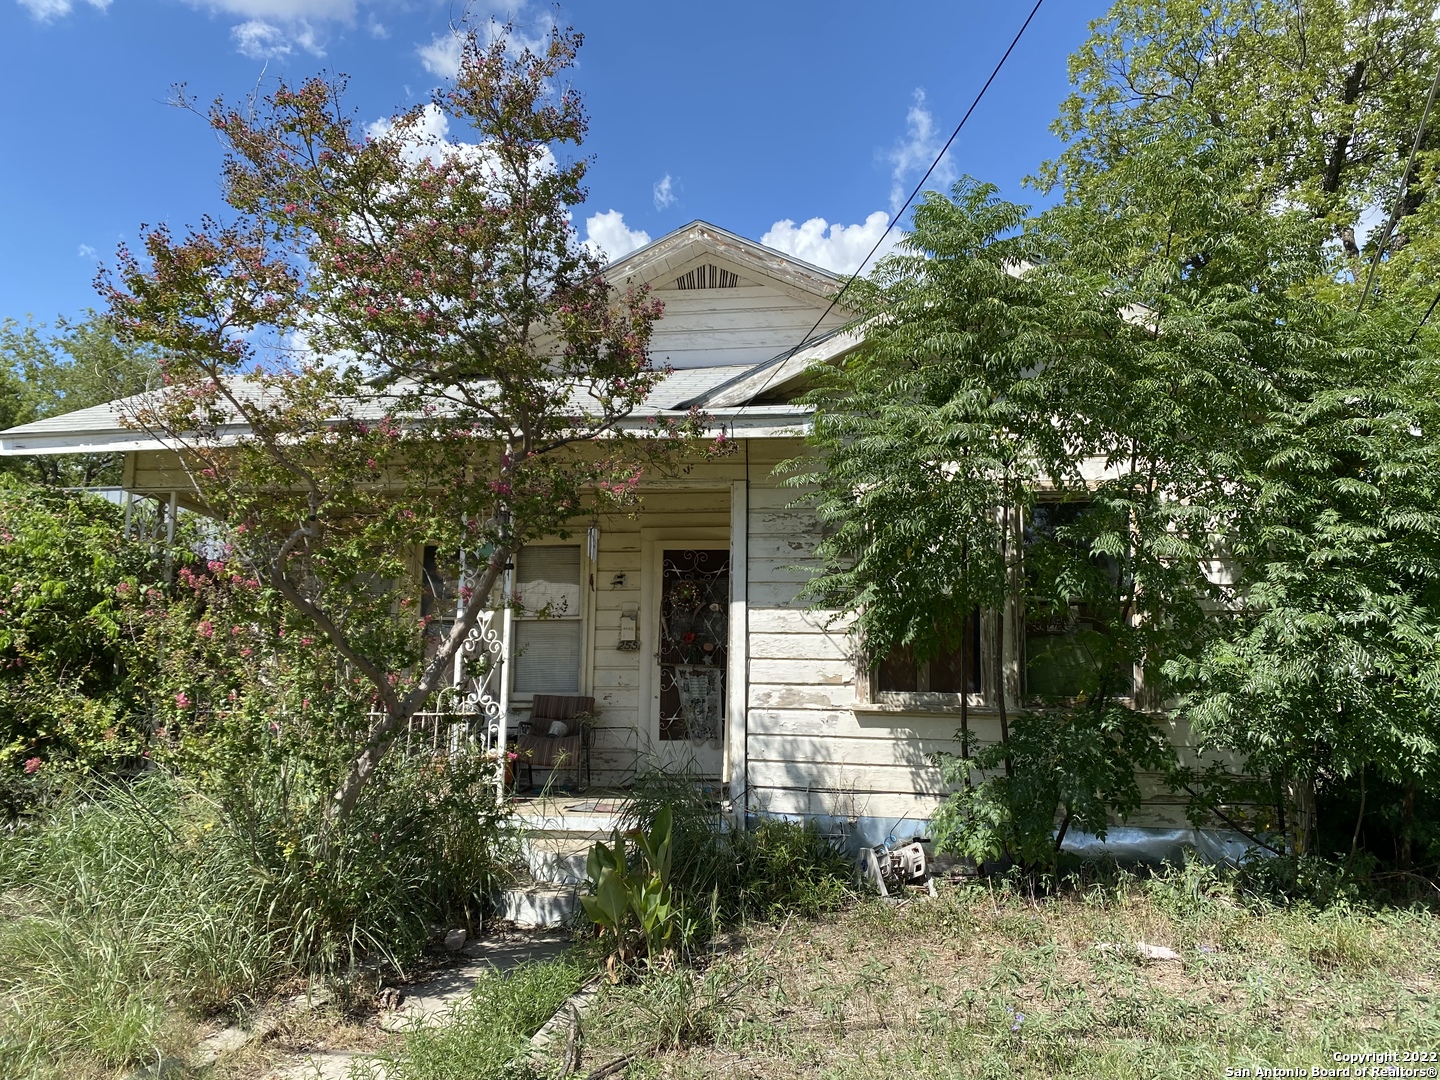 Potential, Potential, Potential! This craftsman style home is ready for a new owner! Located in the Lone Star District, this property needs a full renovation but it's prime location makes it a great opportunity! Nice oversized, corner lot. Buyer to verify square footage!